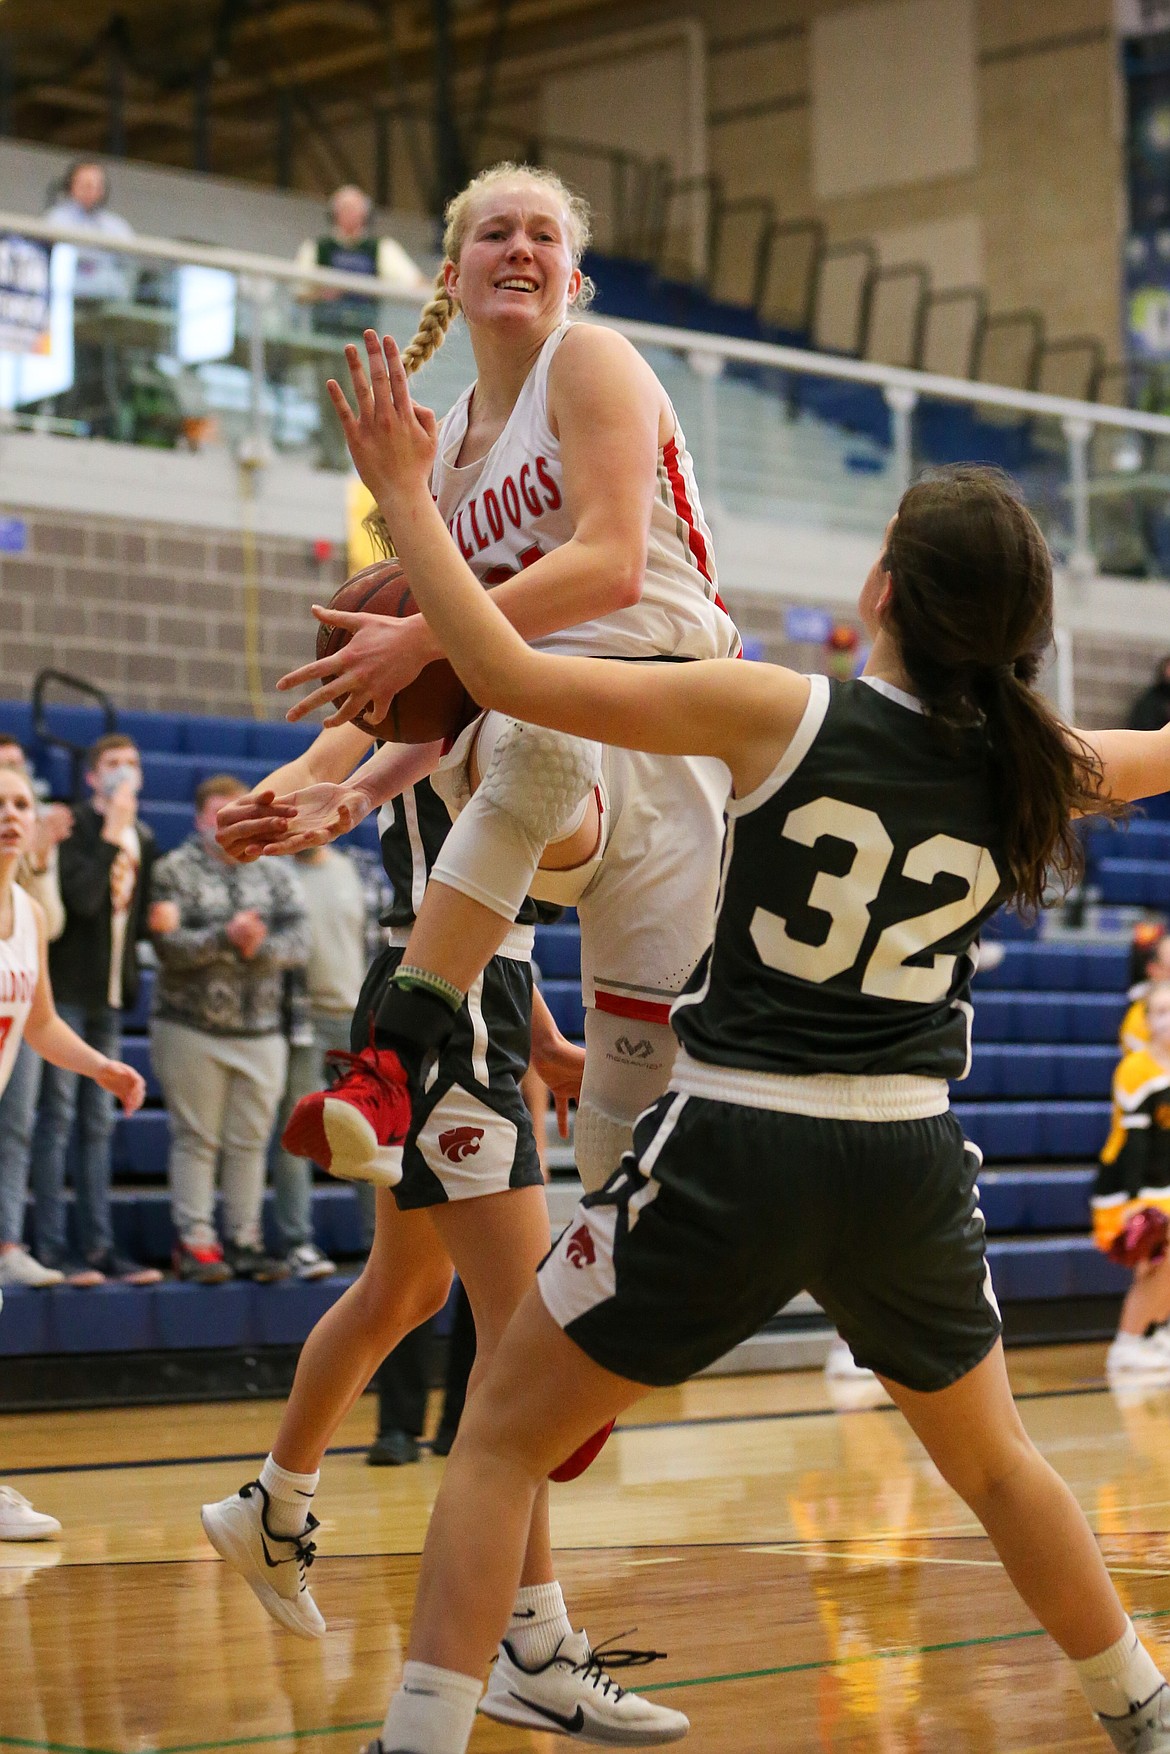 Hattie Larson goes airborne while attacking the basket on Thursday.